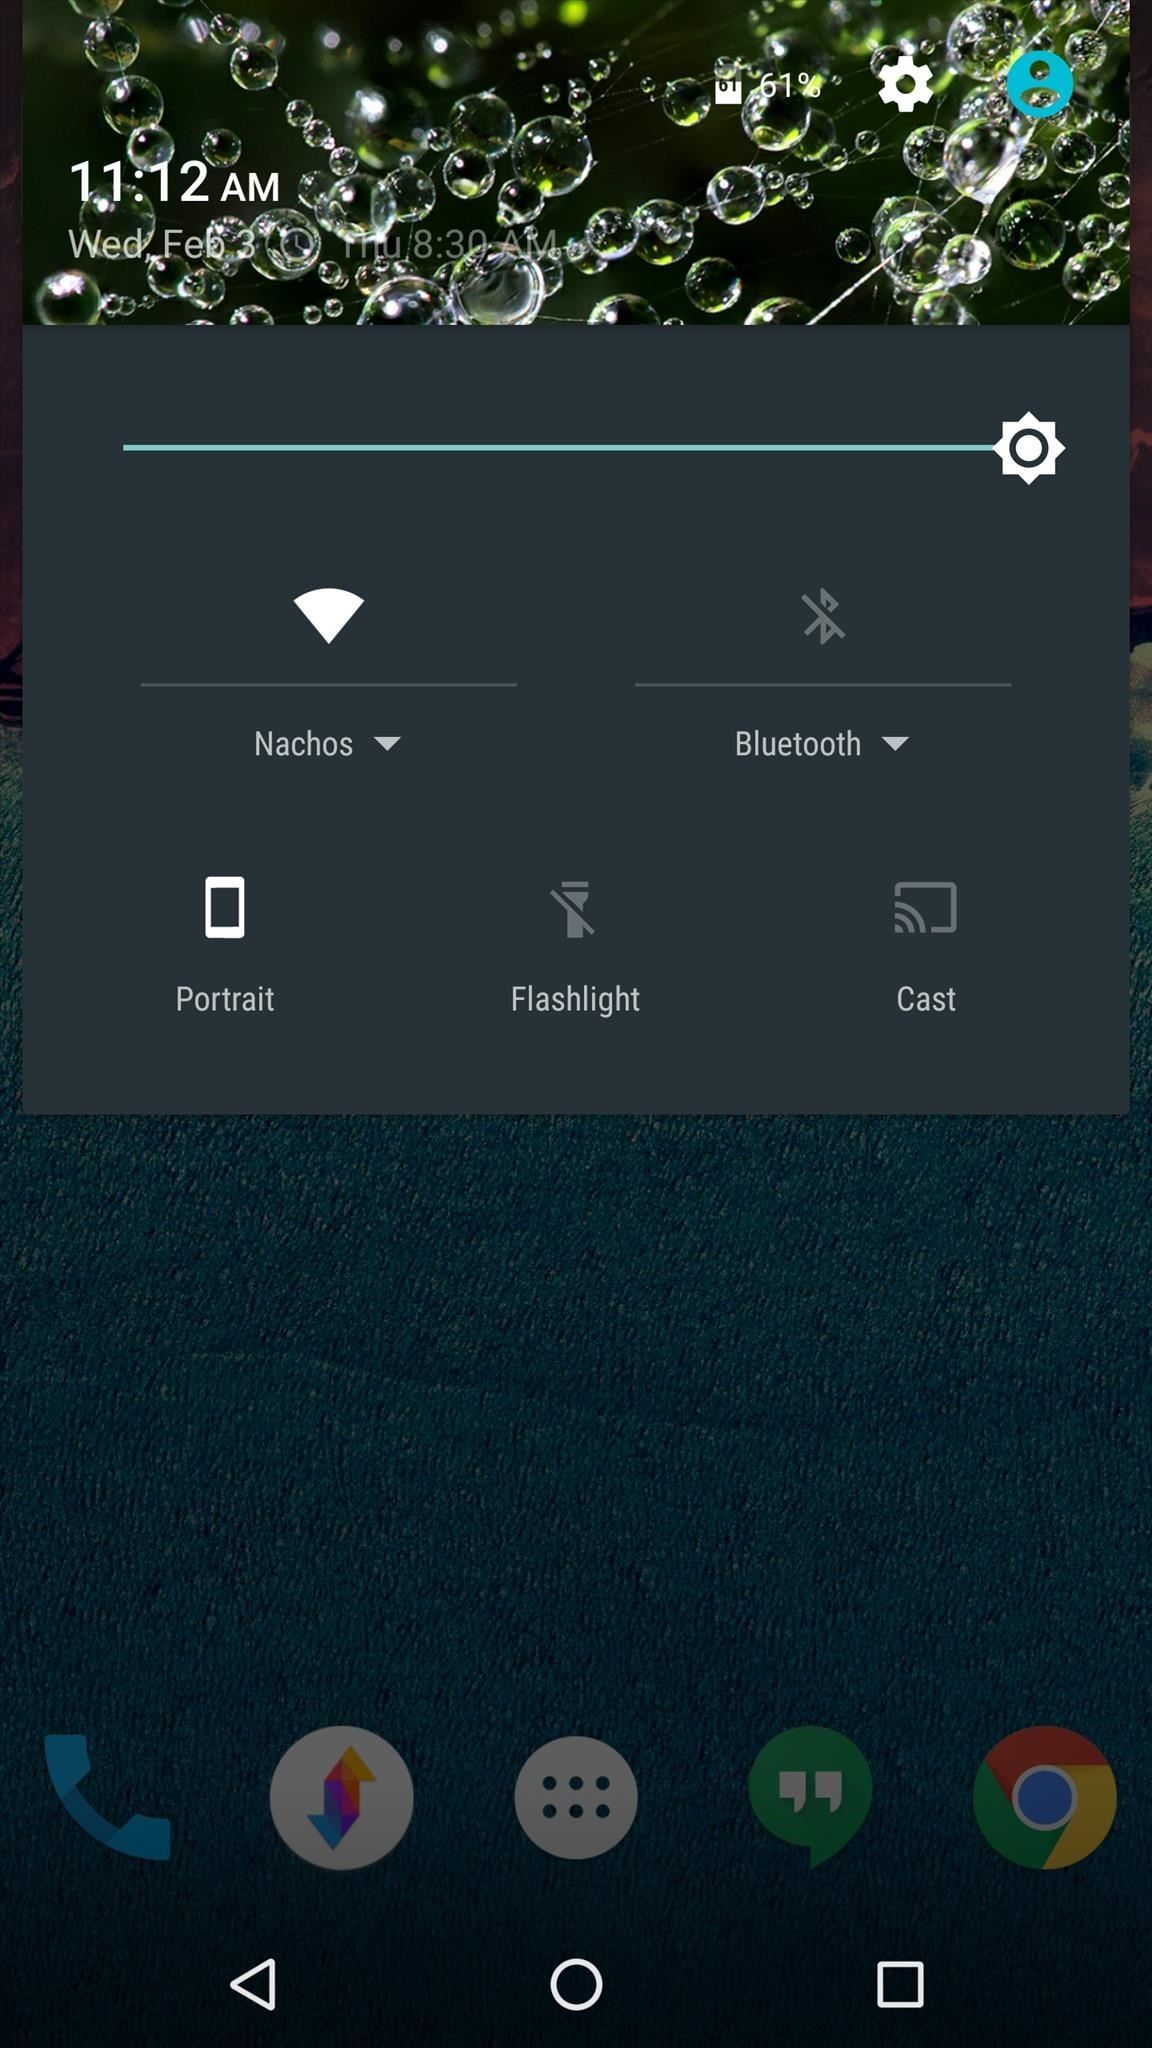 Customize Your Android's Pull-Down Menu with Beautiful Backgrounds